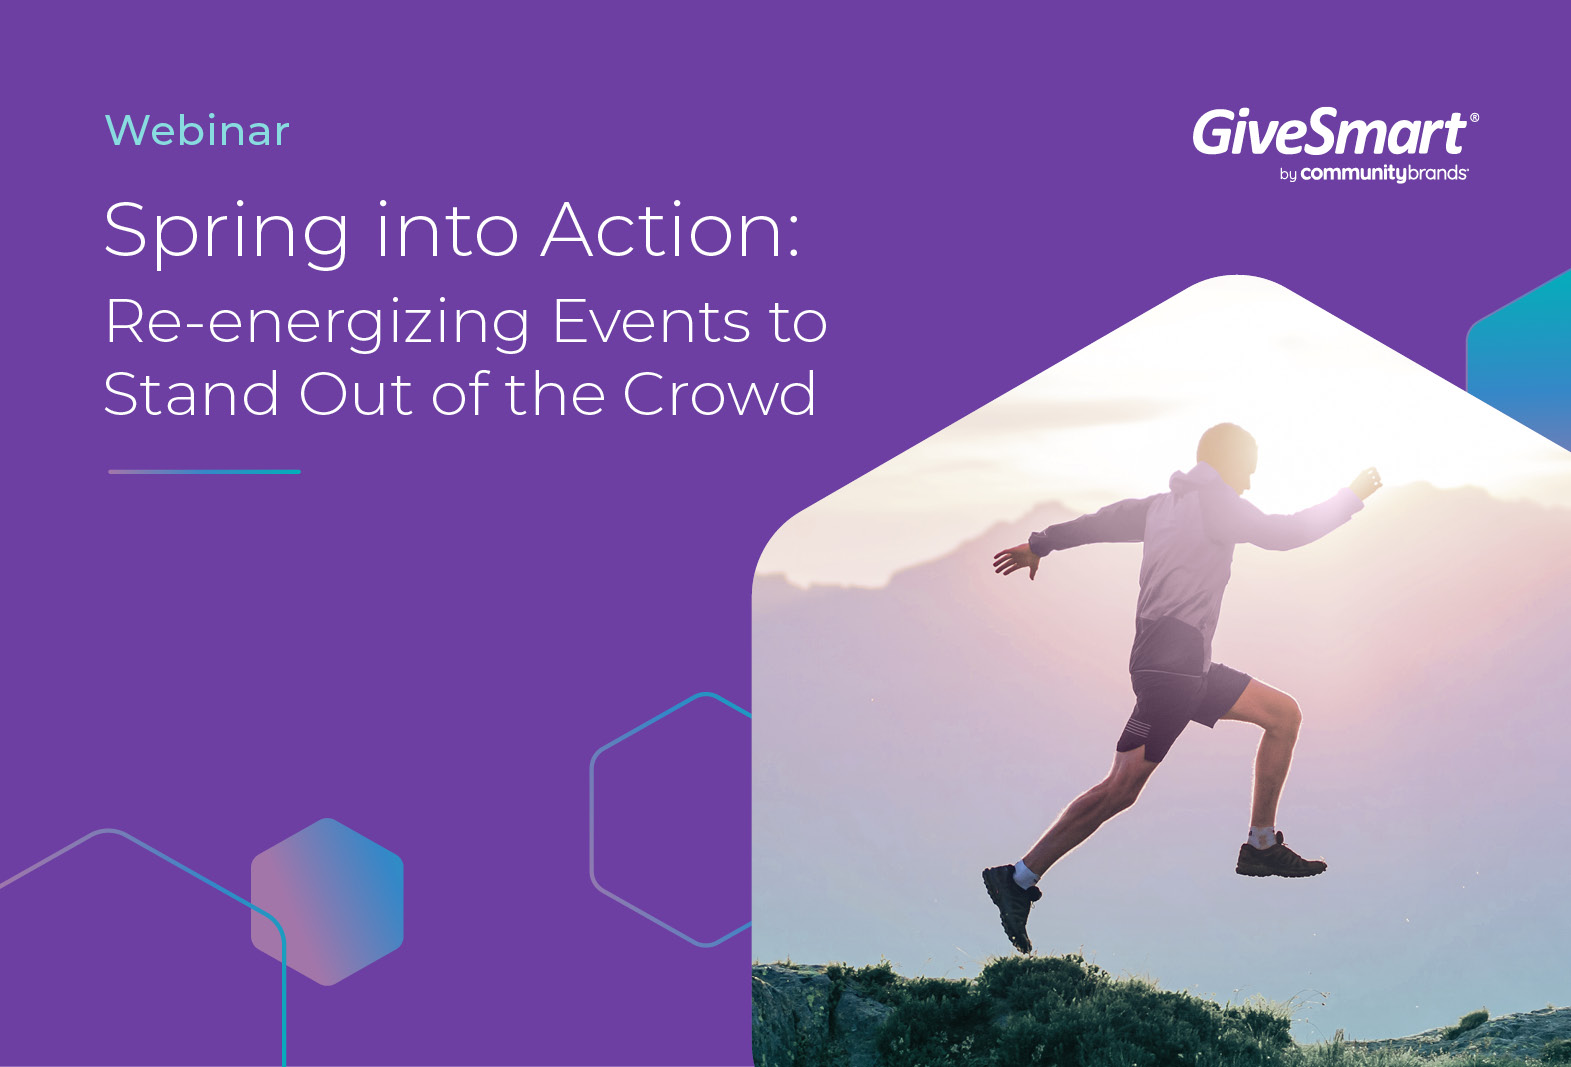 Spring into Action: Re-energizing Events to Stand Out of the Crowd